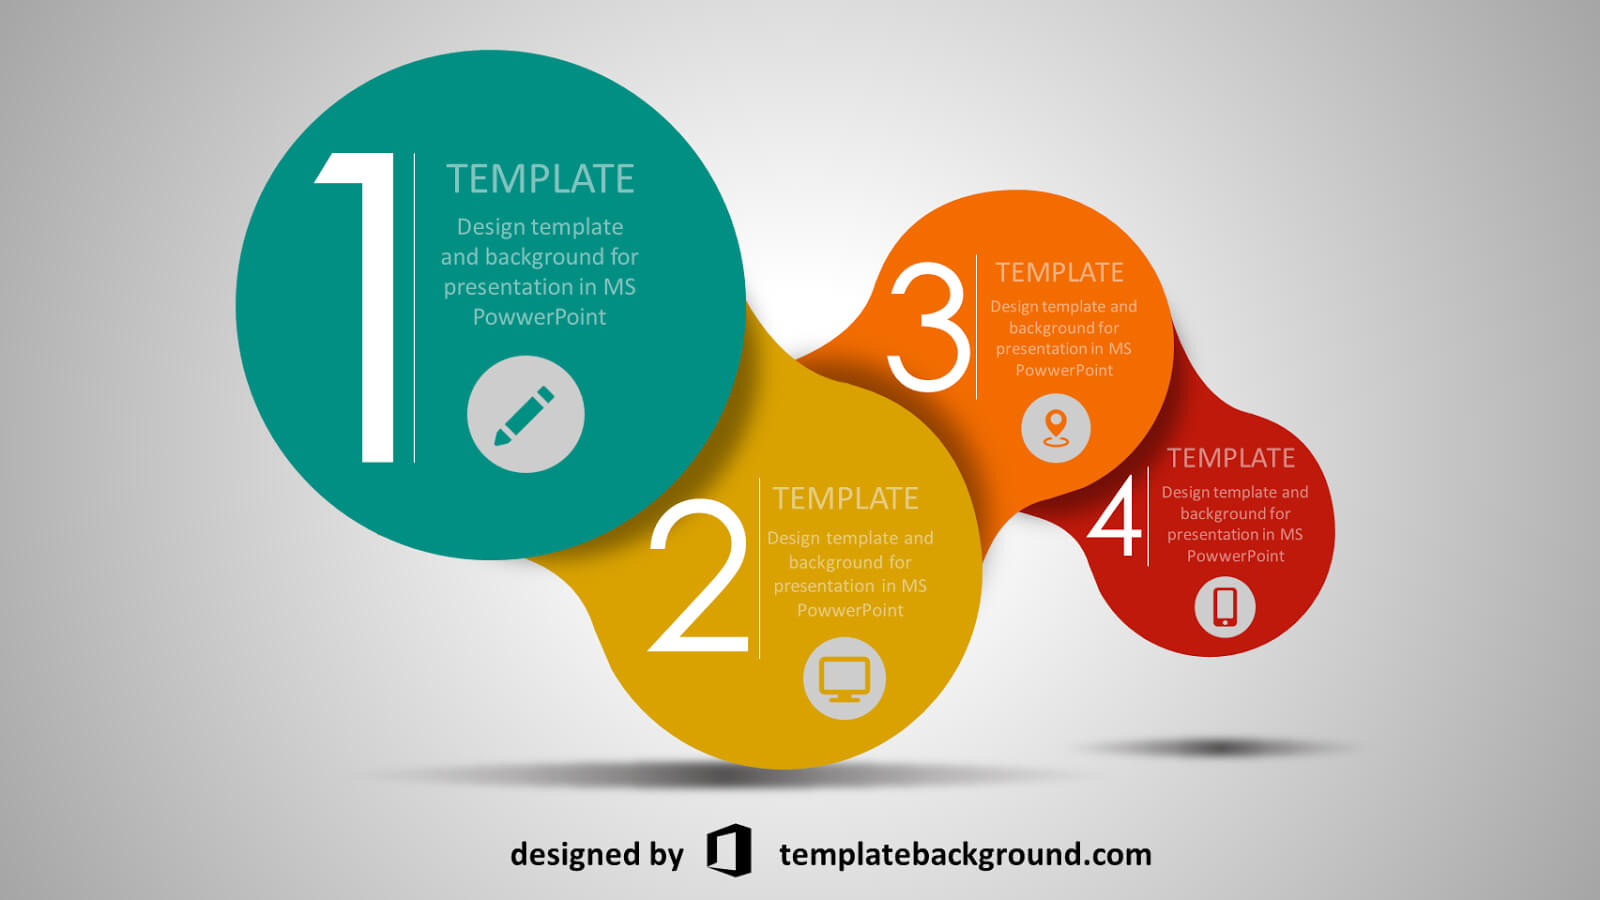 Animated Templates For Powerpoint 2010 Free Download Theme With Regard To Powerpoint Animated Templates Free Download 2010